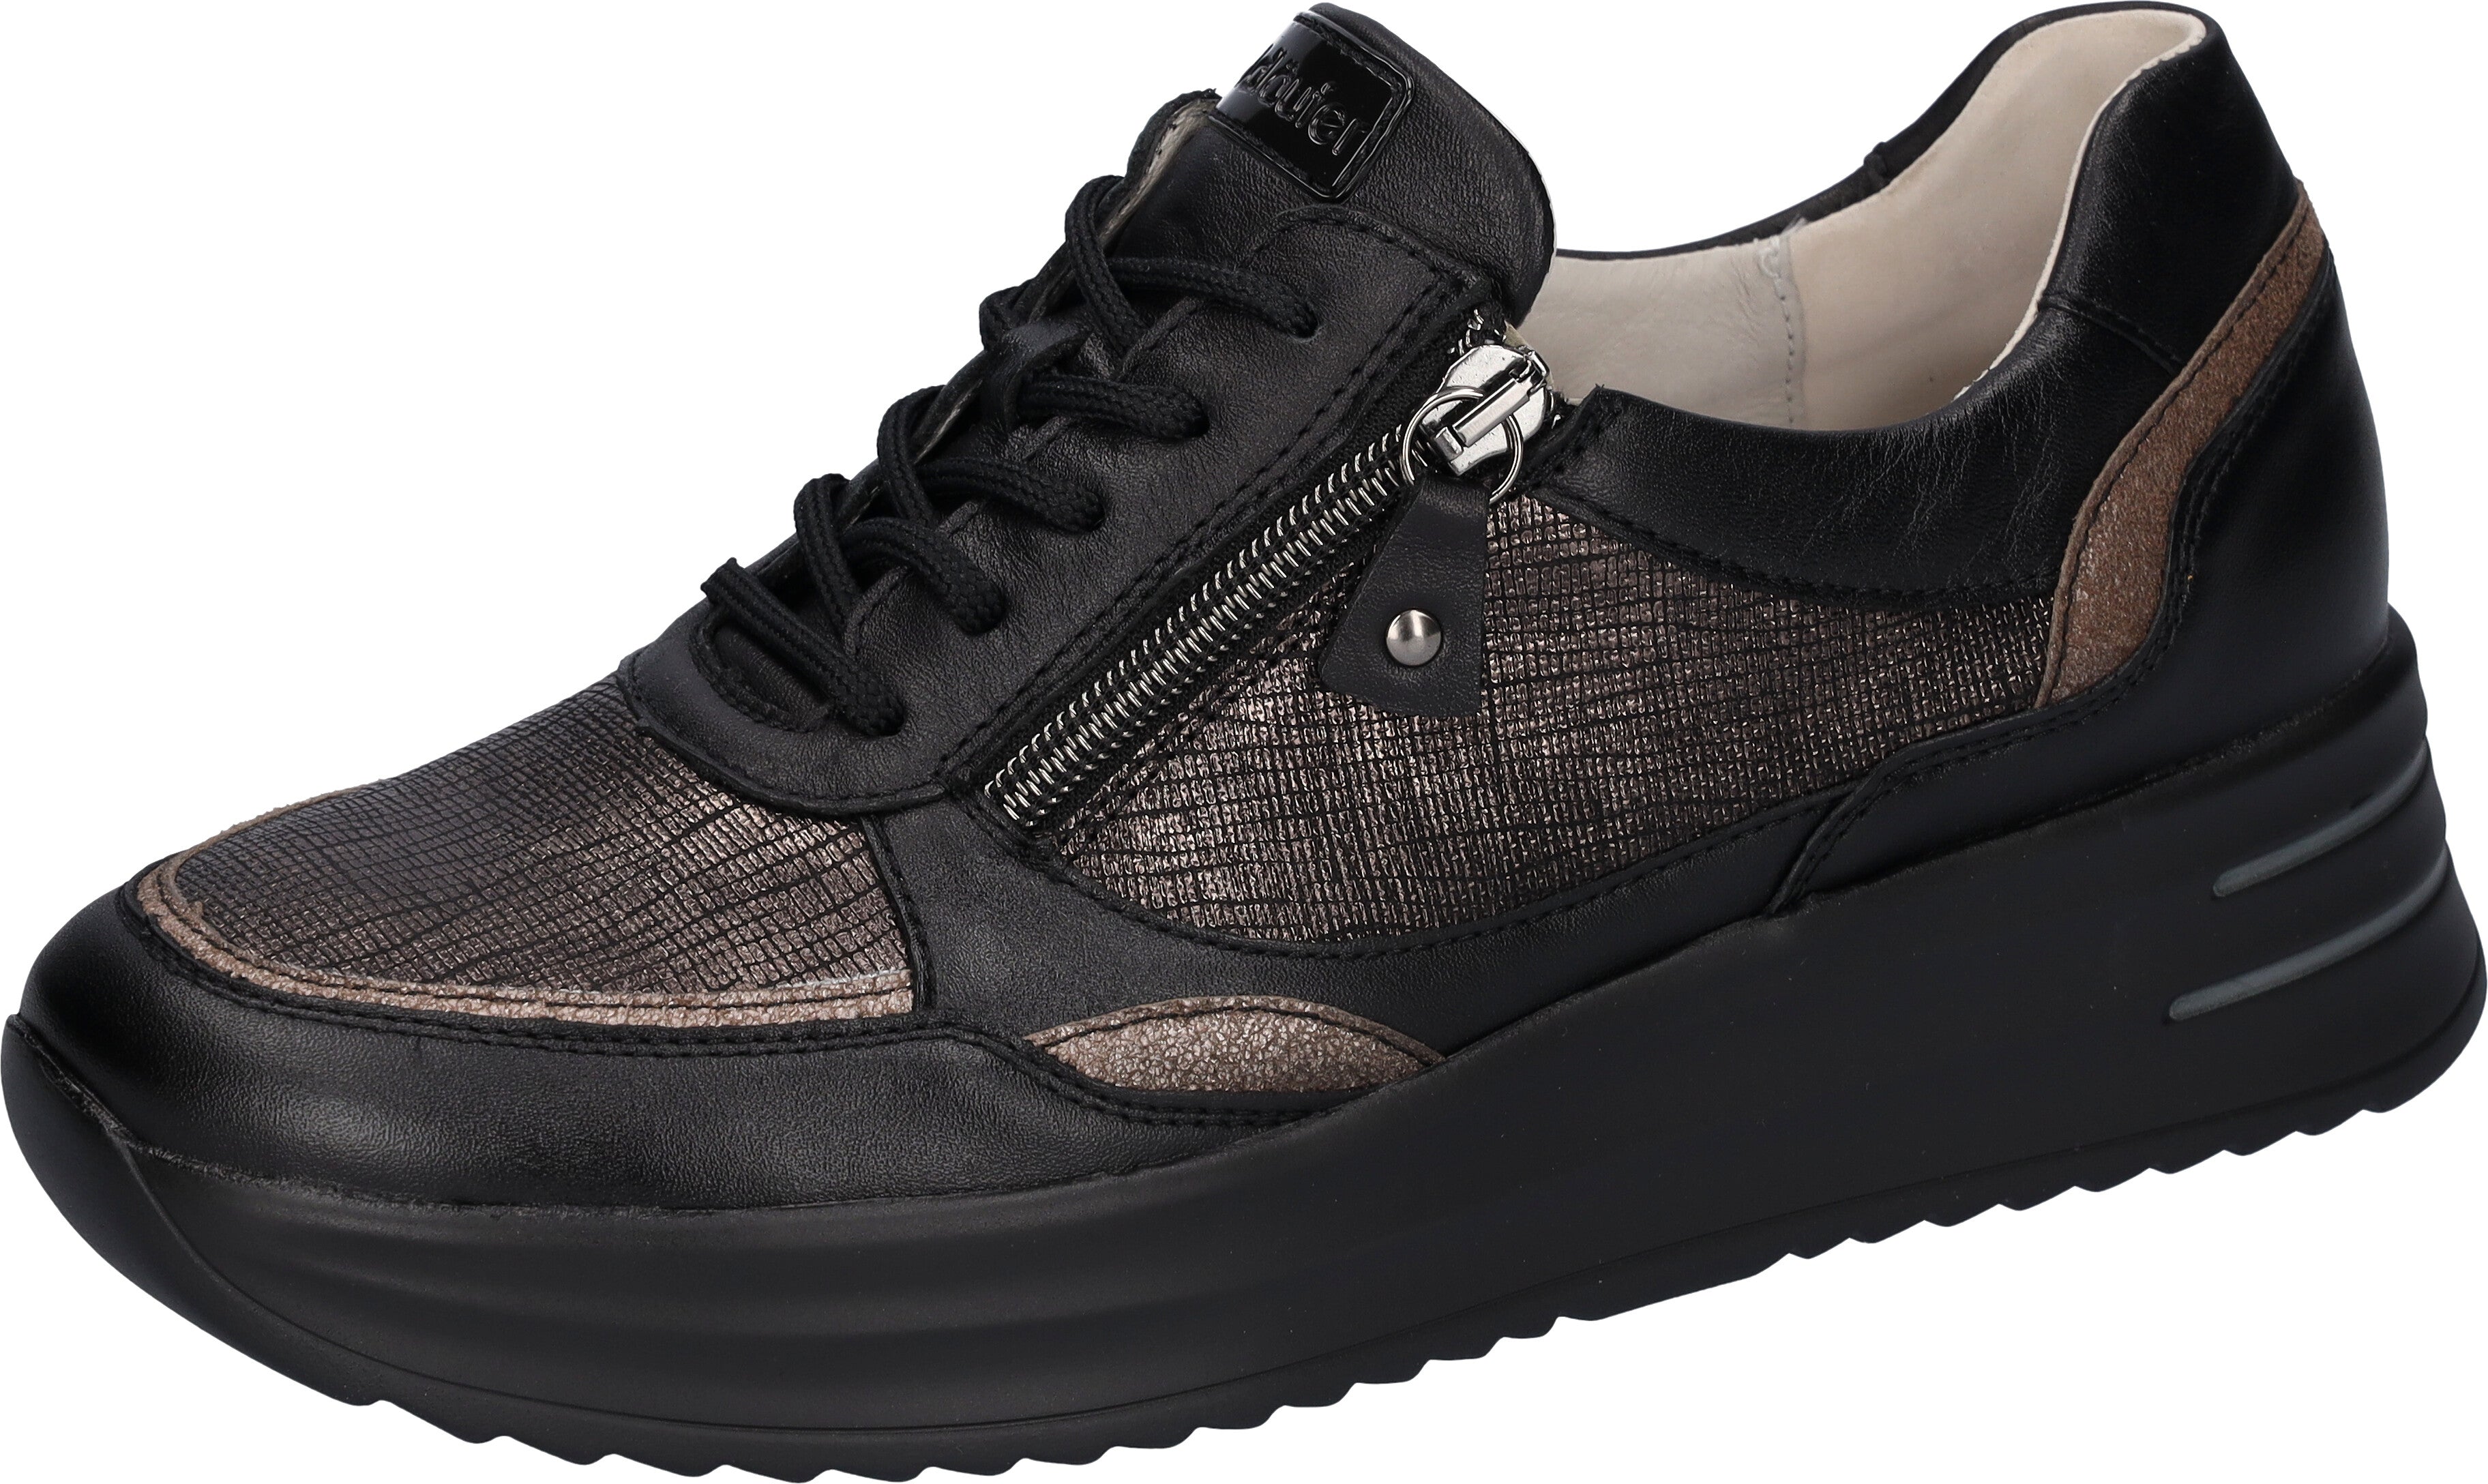 Waldlaufer 755004 310 370 H-Arianna Ladies Black & Bronze Leather Arch Support Zip & Lace Shoes